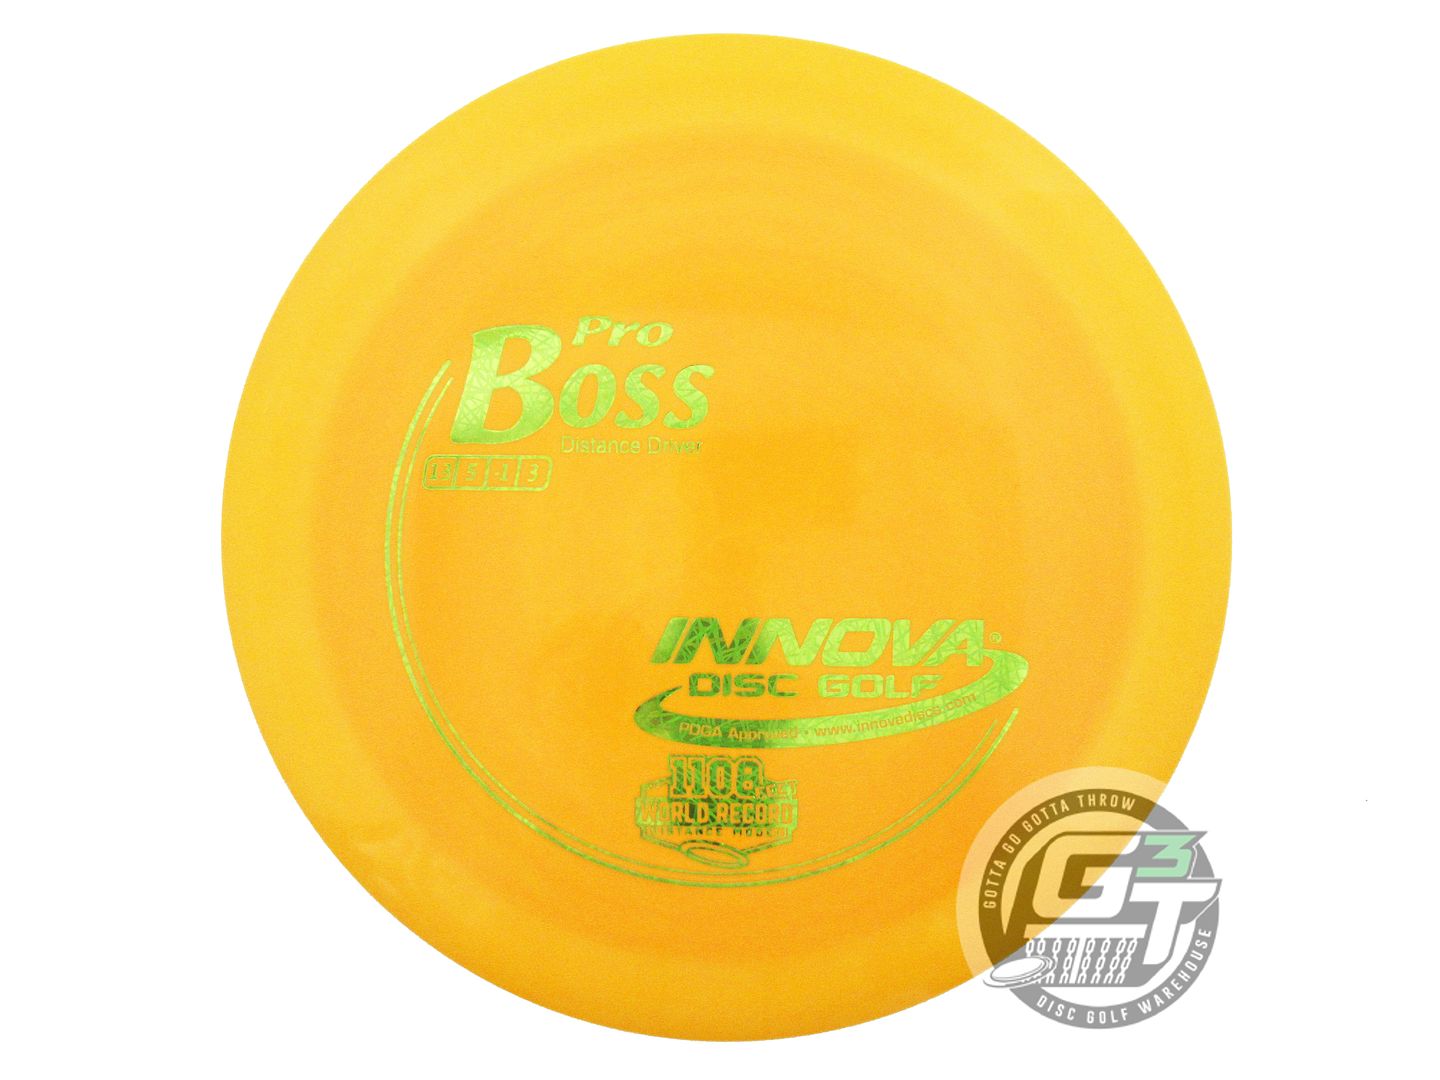 Innova Pro Boss Distance Driver Golf Disc (Individually Listed)